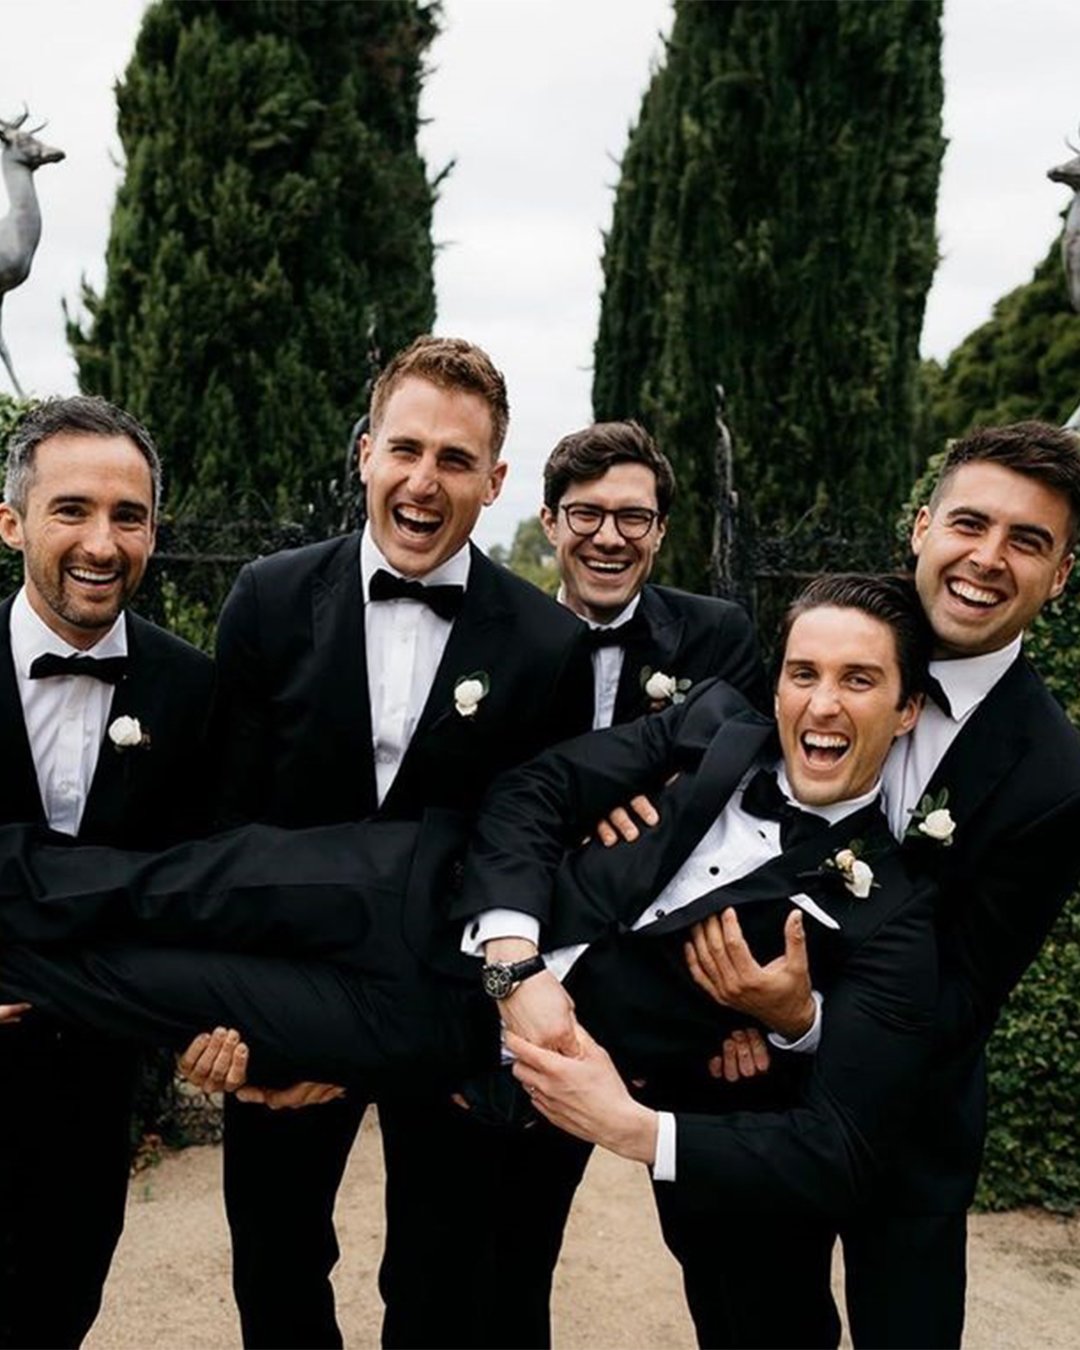 funny wedding pictures funny groomsmen pictures